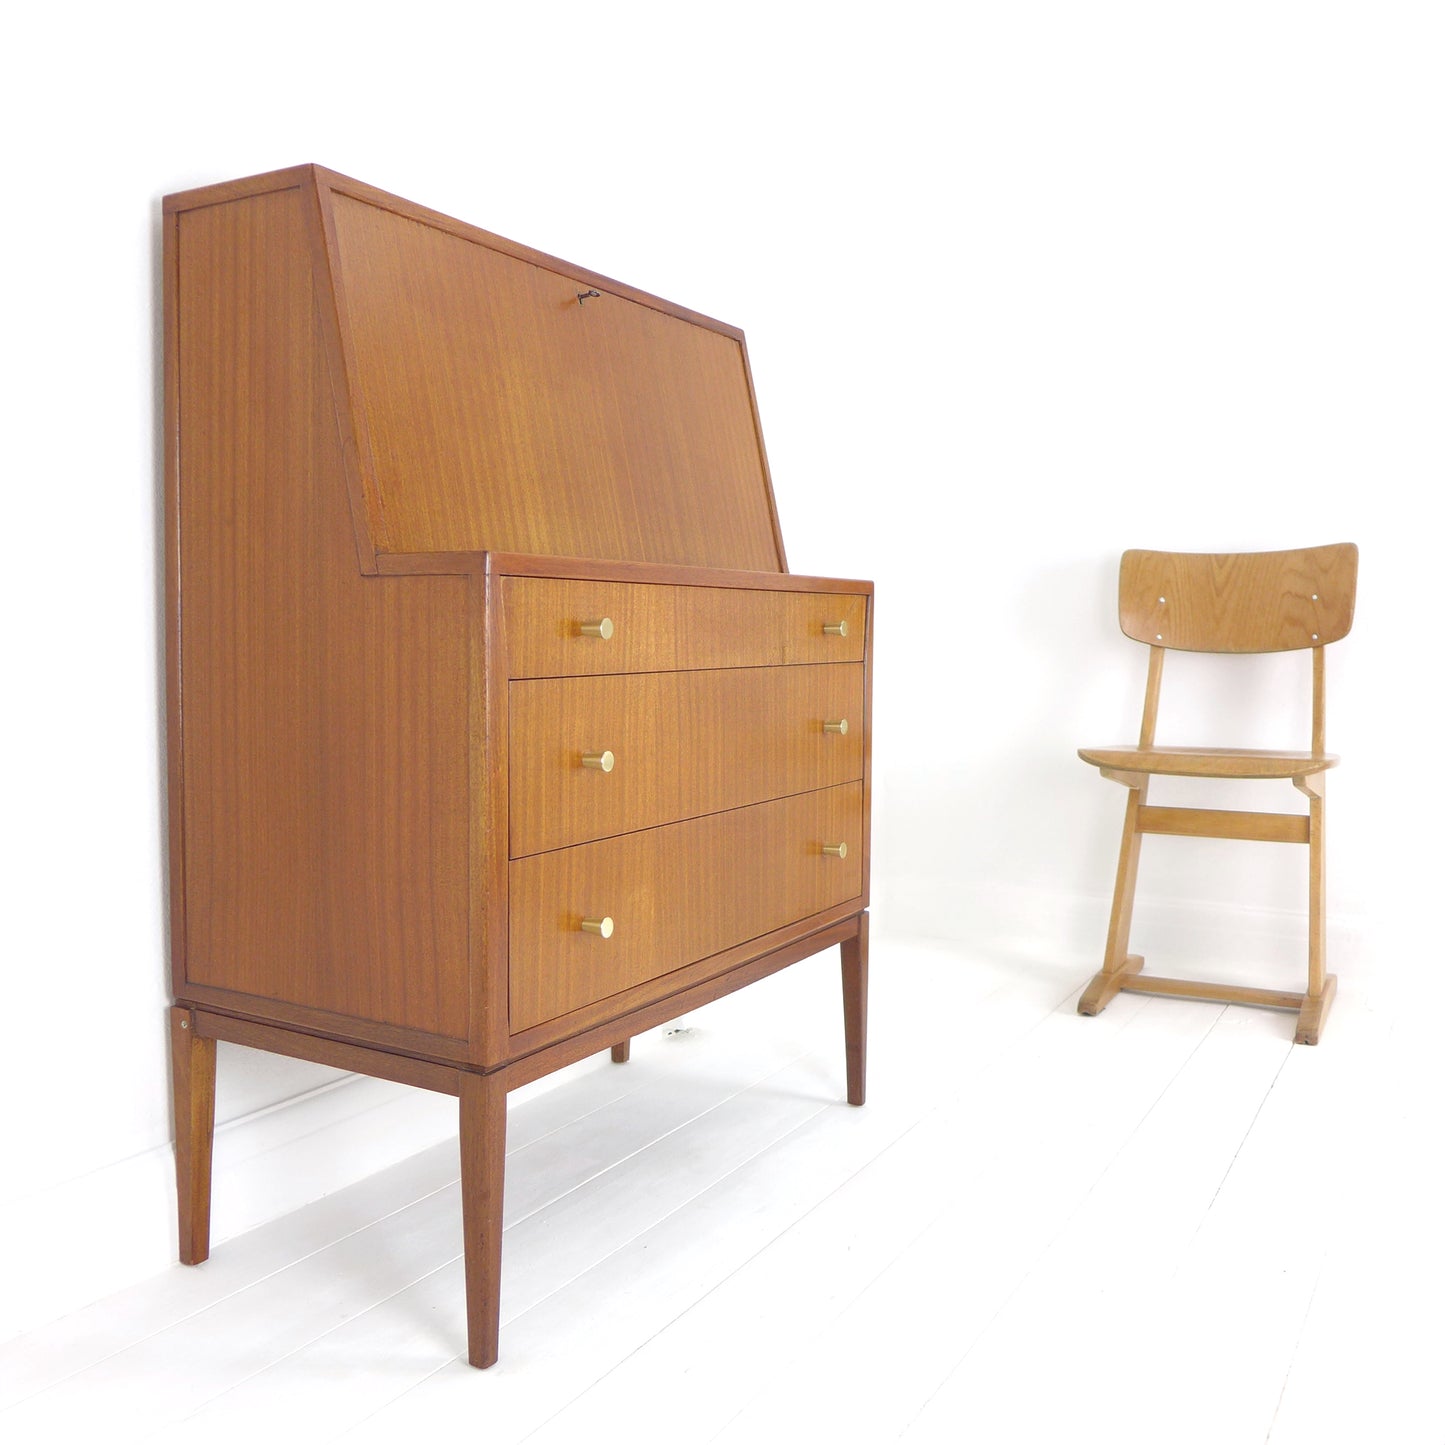 Mid Century Desk / Bureau with Leather Writing Slope - Possibly by Richard Hornby